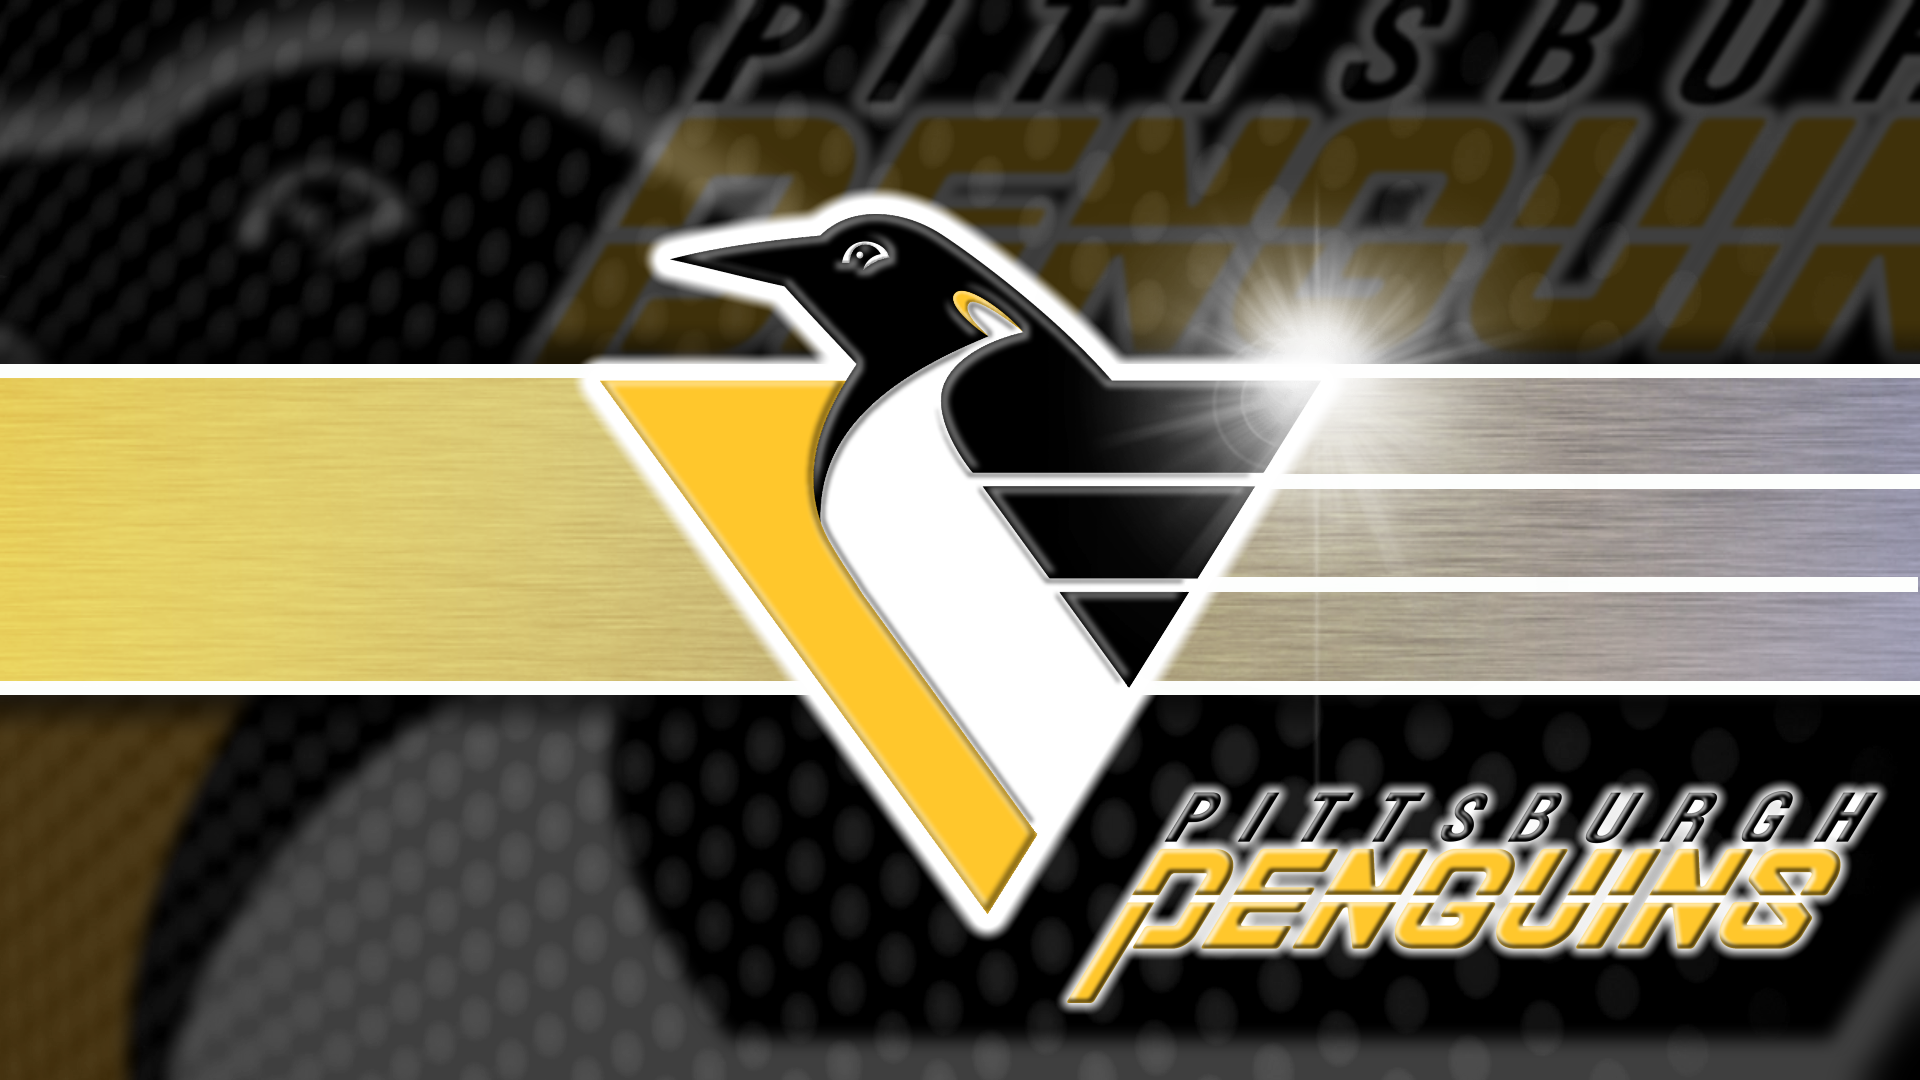 Download wallpapers Pittsburgh Penguins NHL 4k material design logo  white black abstraction lines American hockey club Pittsburgh  Pennsylvania USA National Hockey League for desktop with resolution  3840x2400 High Quality HD pictures wallpapers